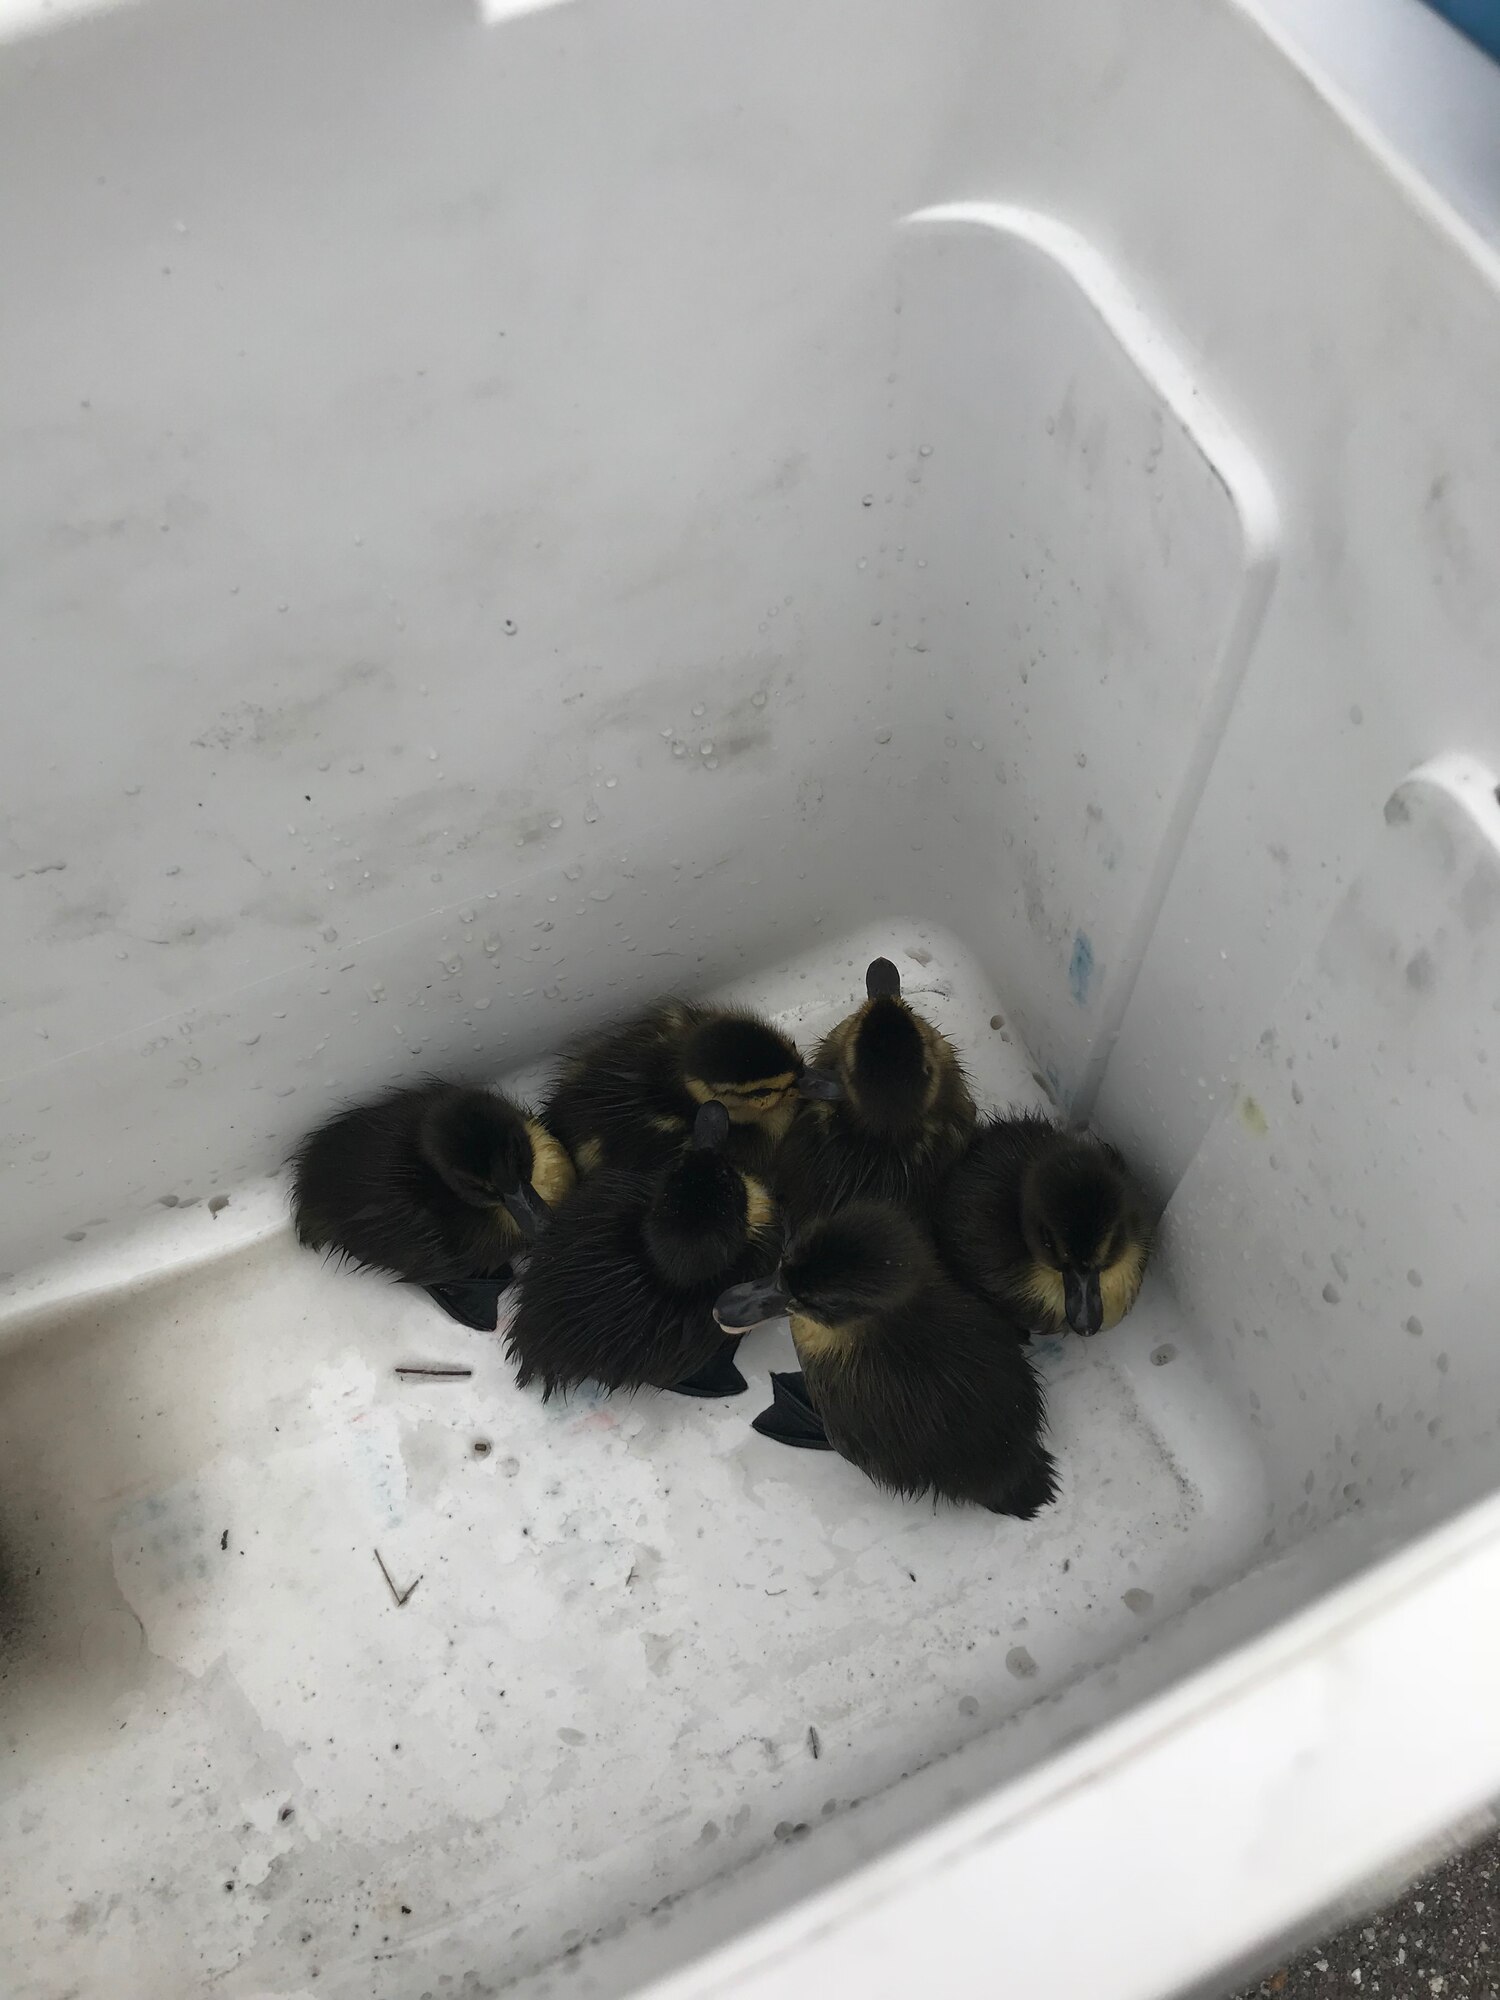 Firefighters were called to a parking lot near building 430 on 6th Street May 2, 2018, at Hill Air Force Base, Utah, to rescue baby ducks stuck in a storm drain. (Courtesy photo)